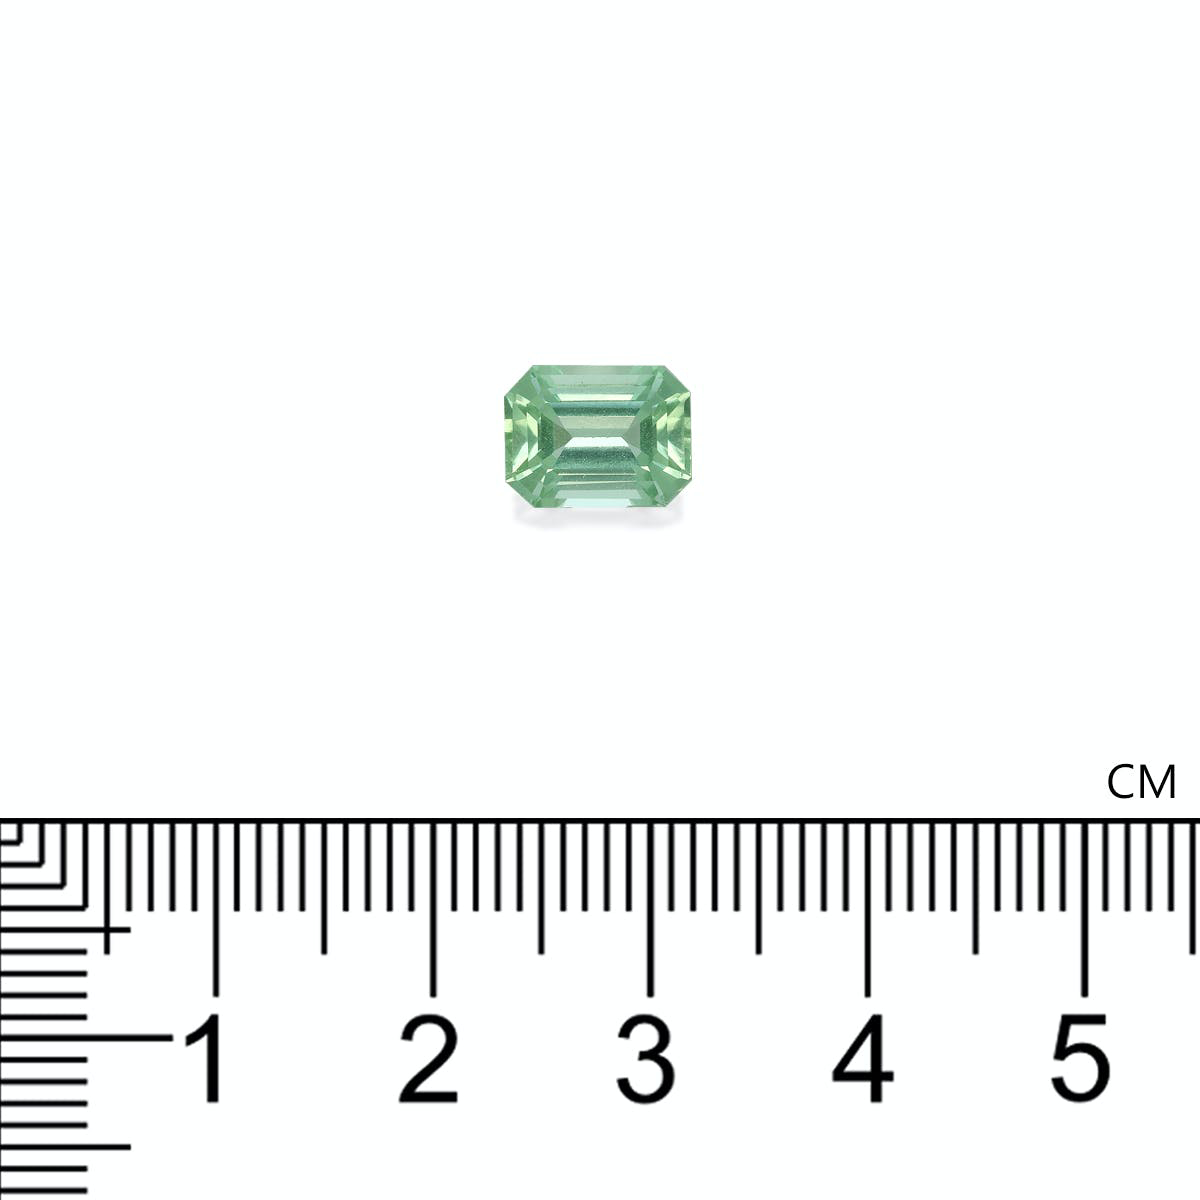 Picture of Mist Green Tourmaline 2.43ct - 9x7mm (TG1495)